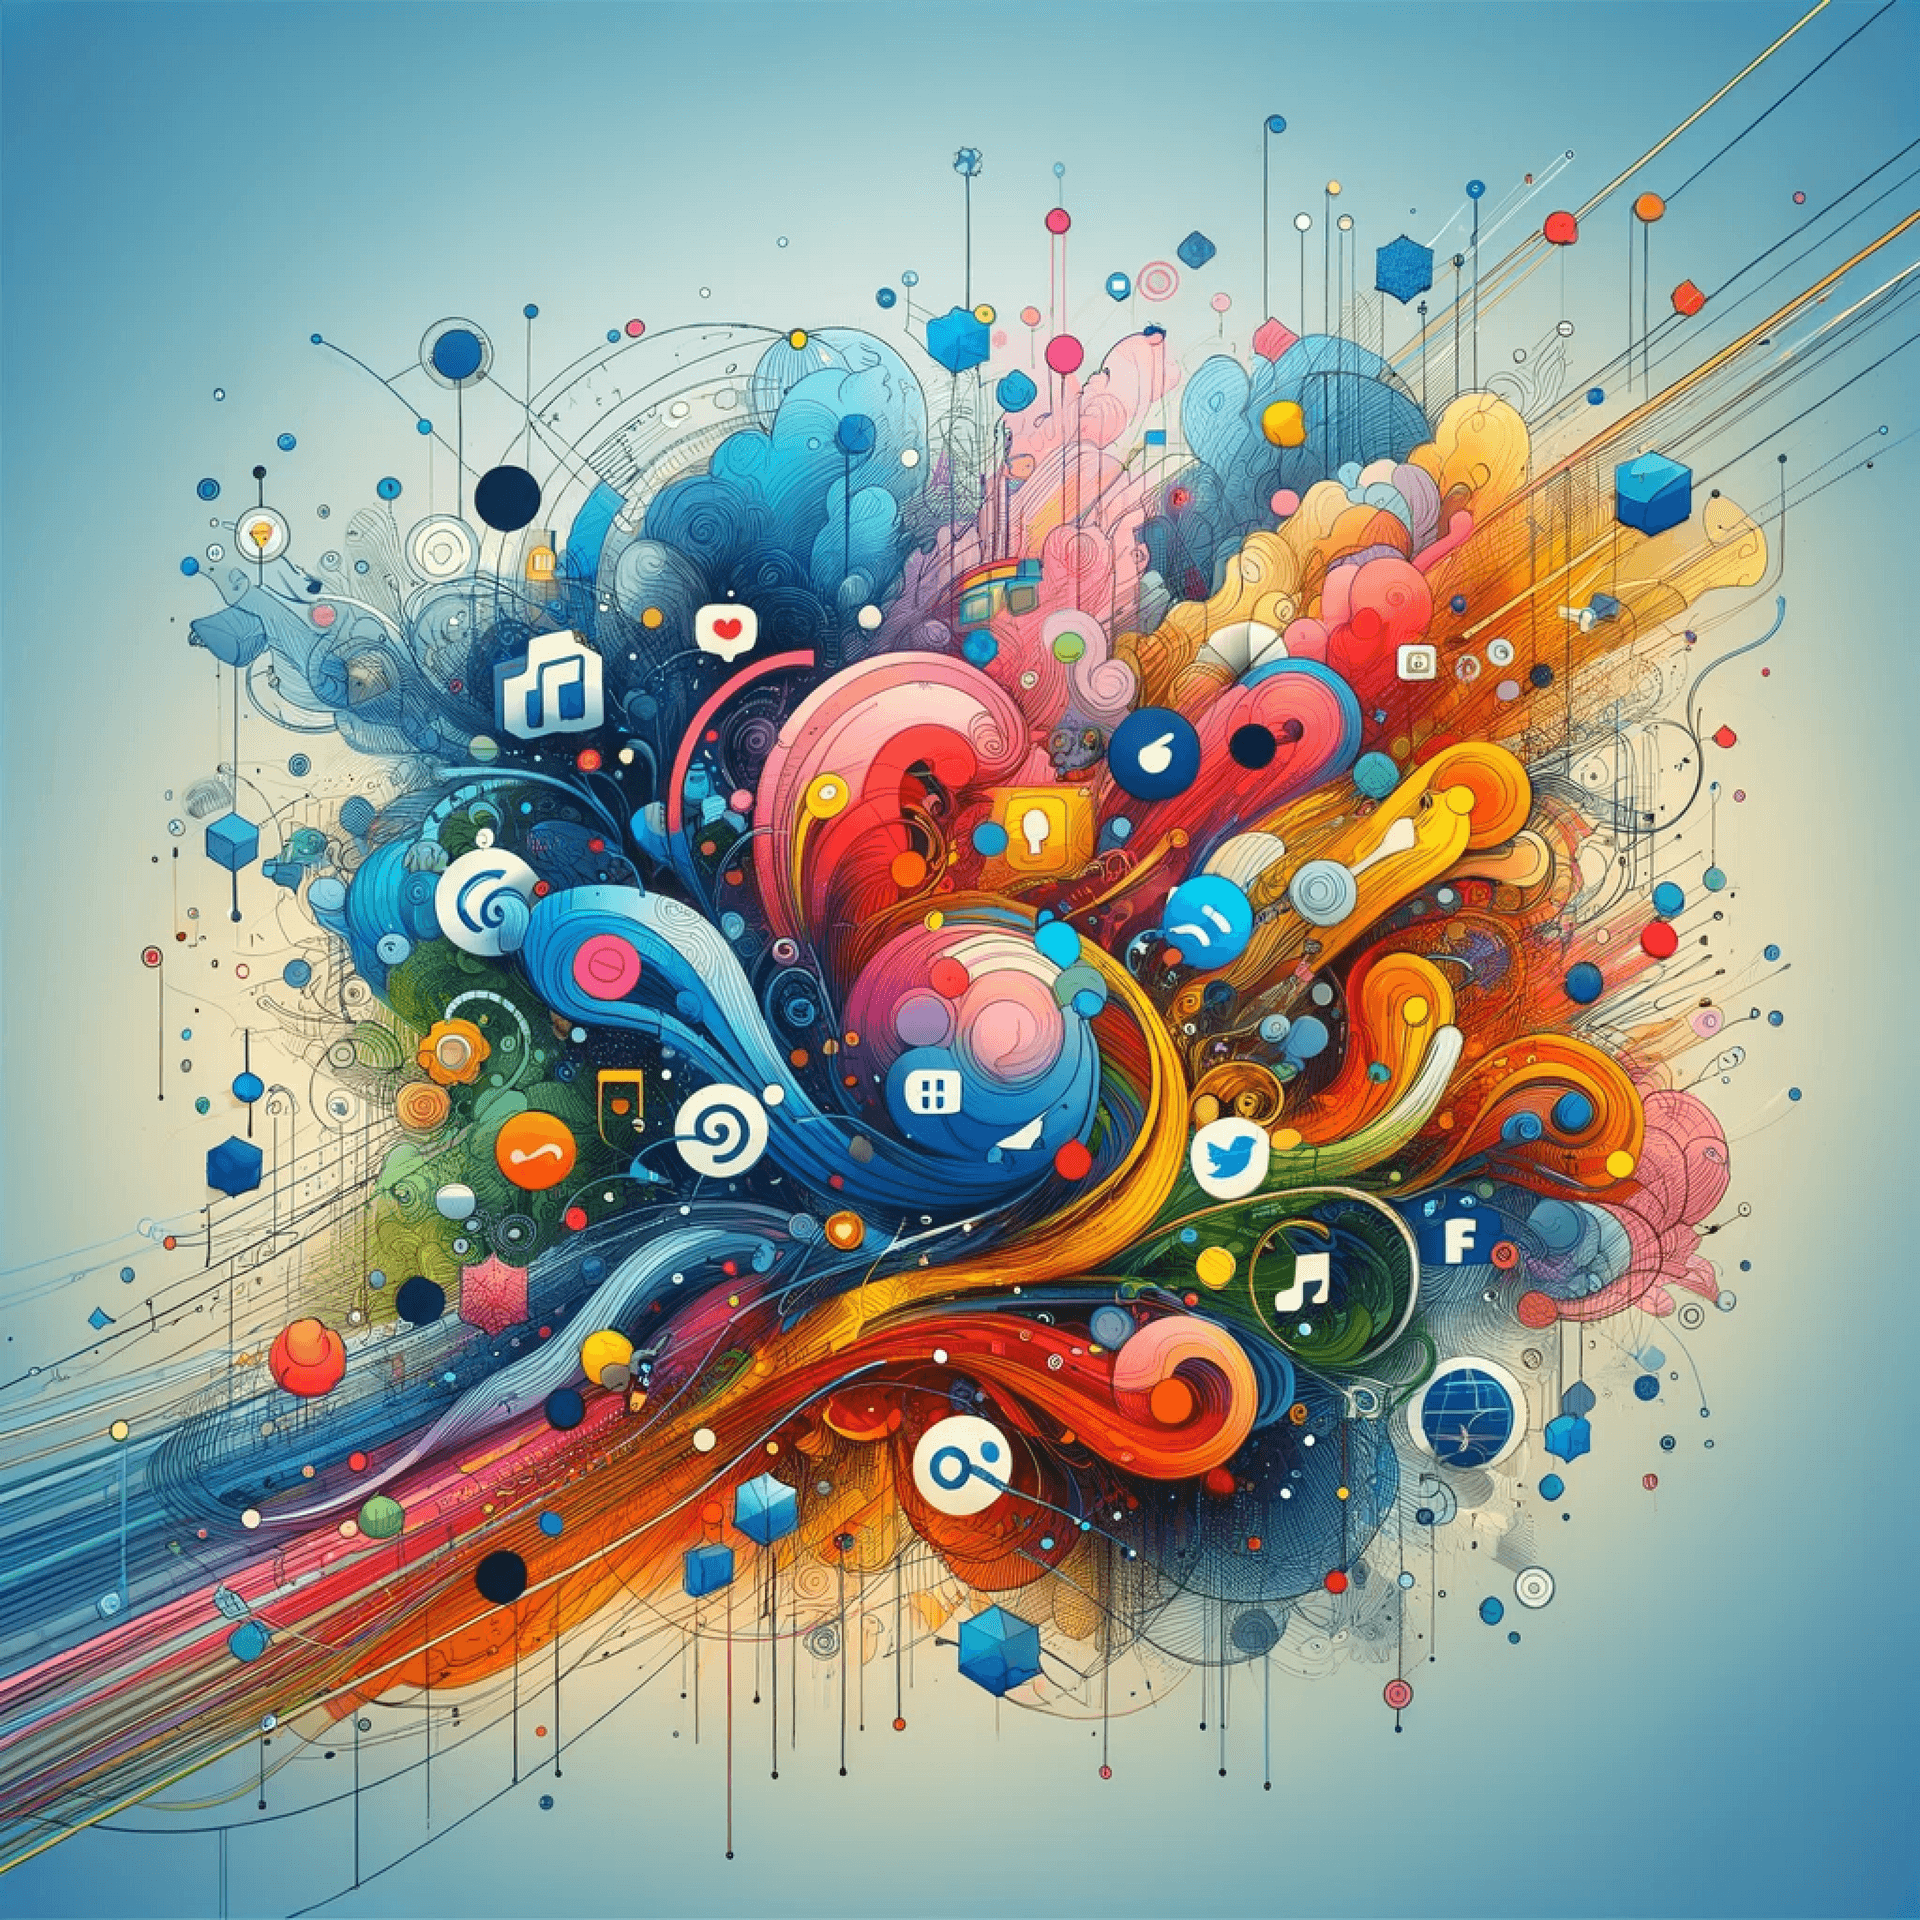 Abstract, dynamic image representing the concept of Social Media Management.